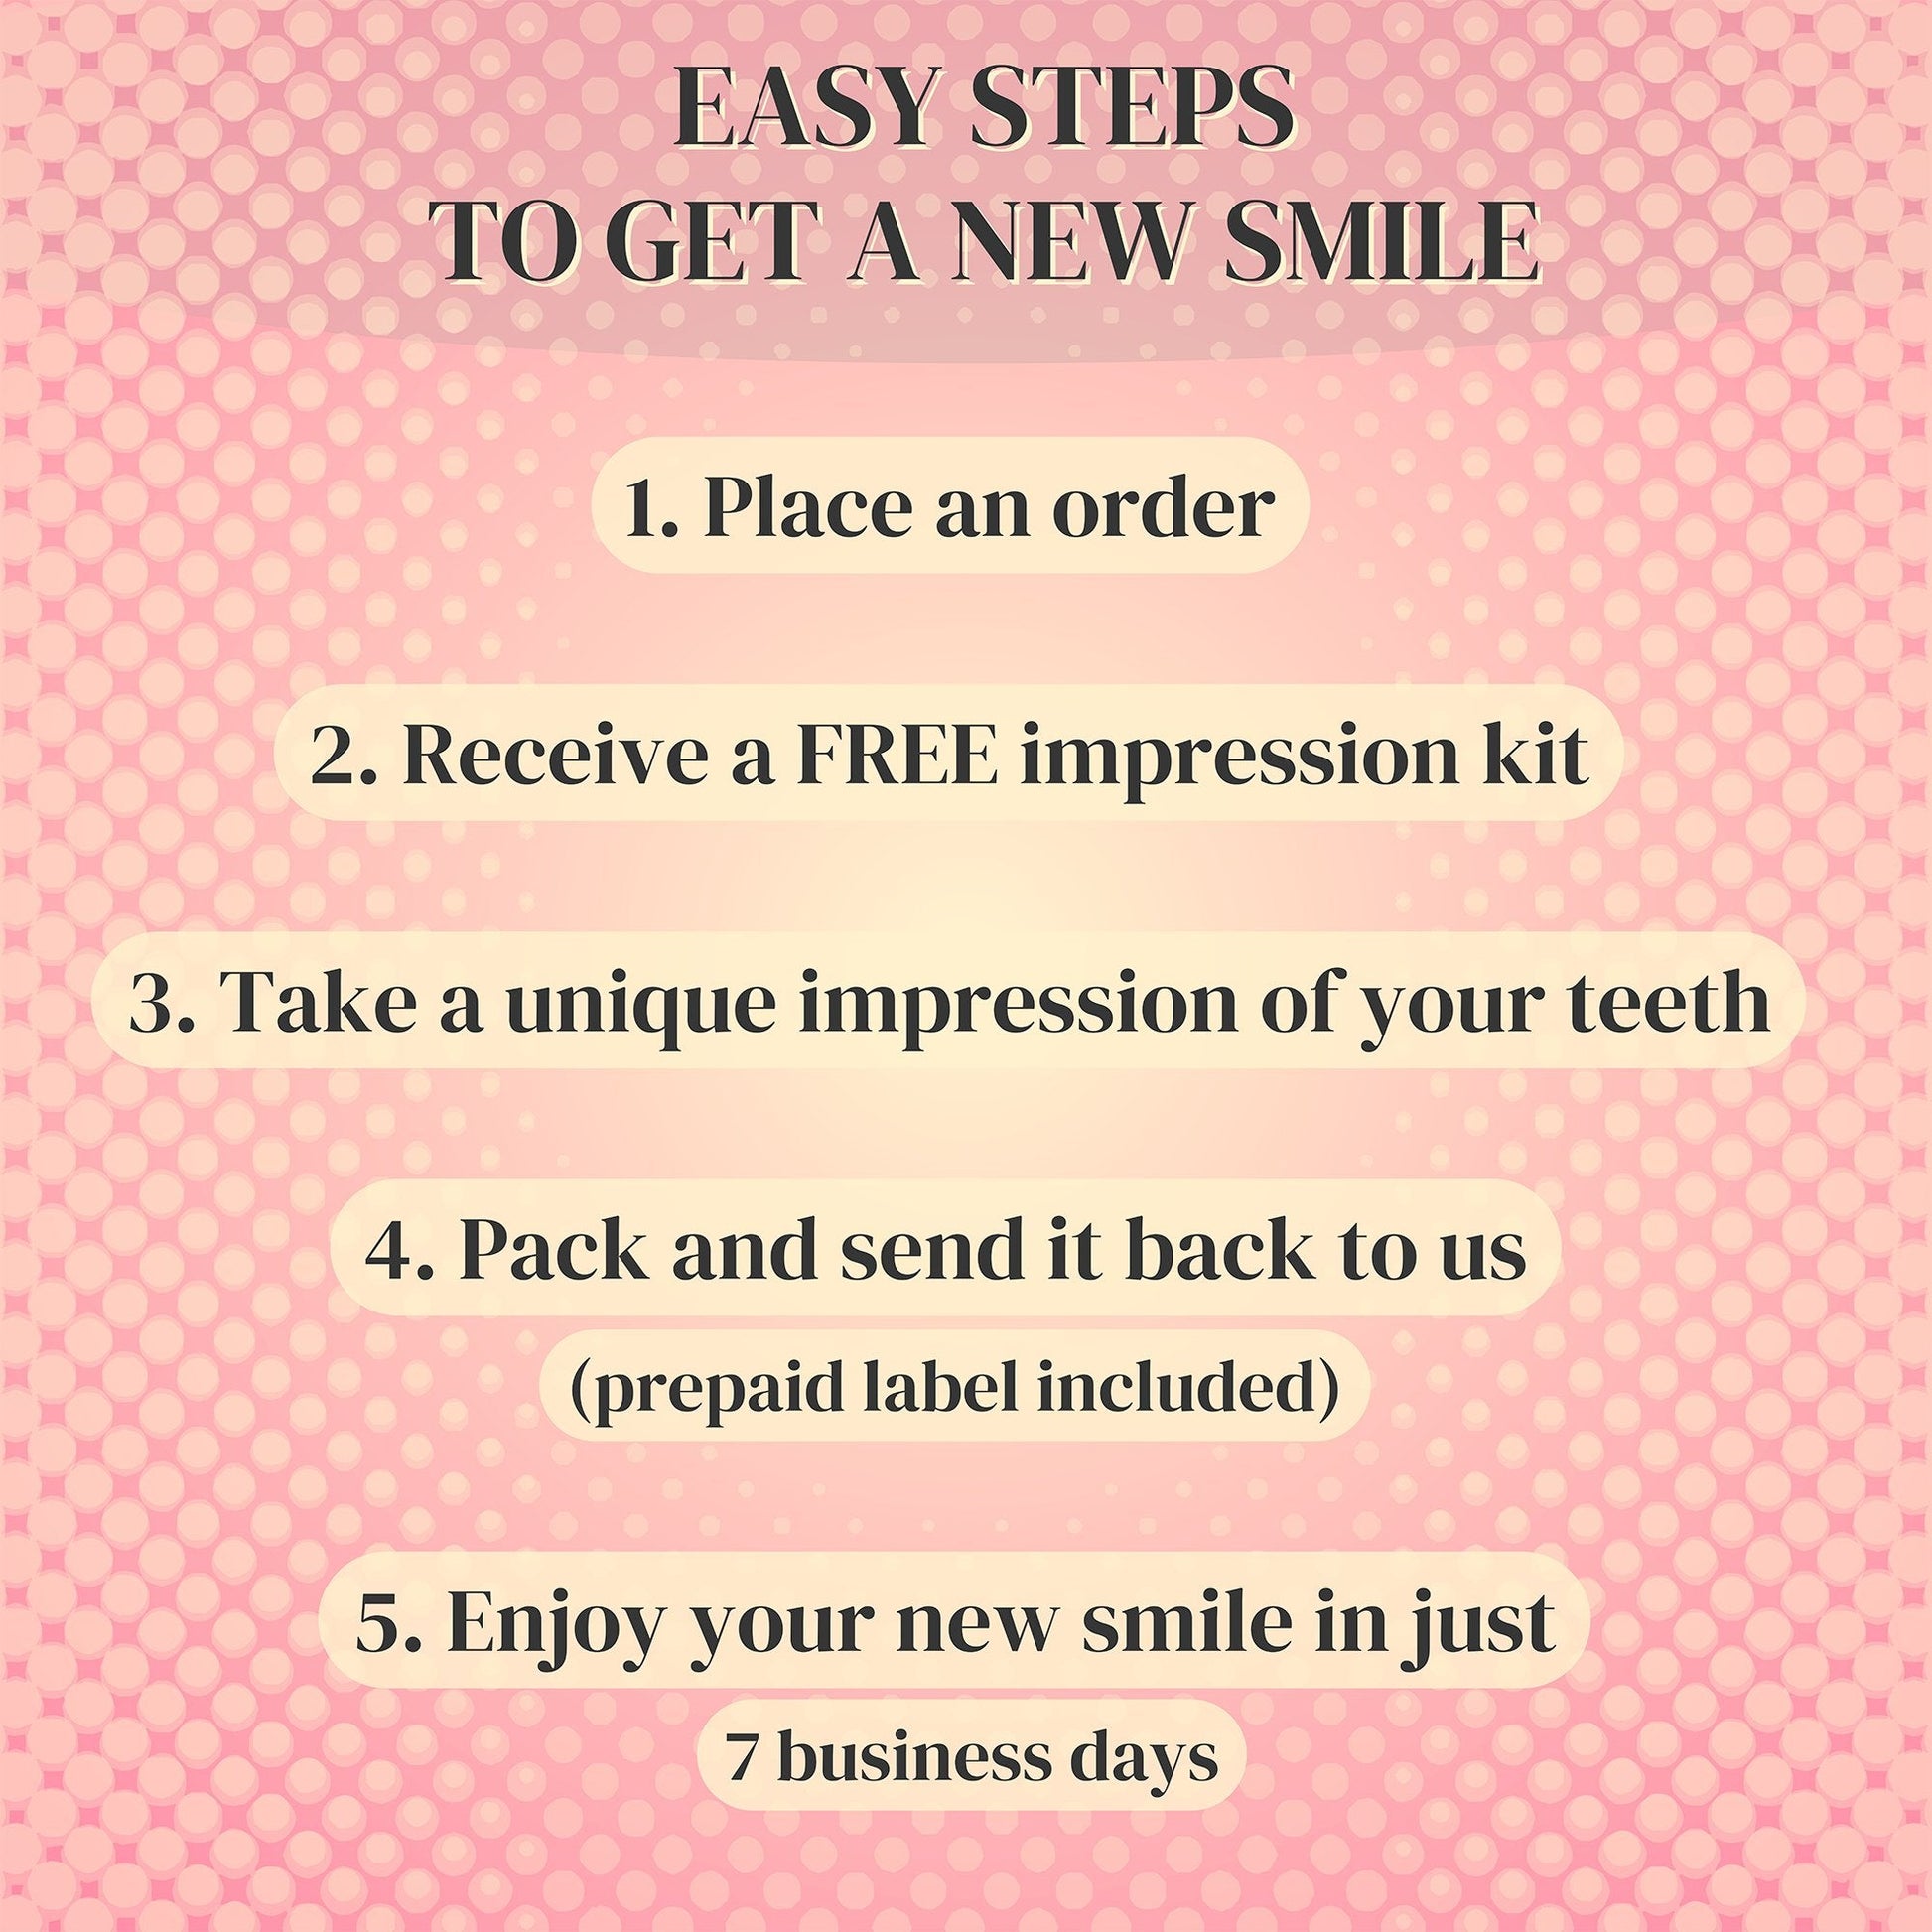 easy steps to get a new smile